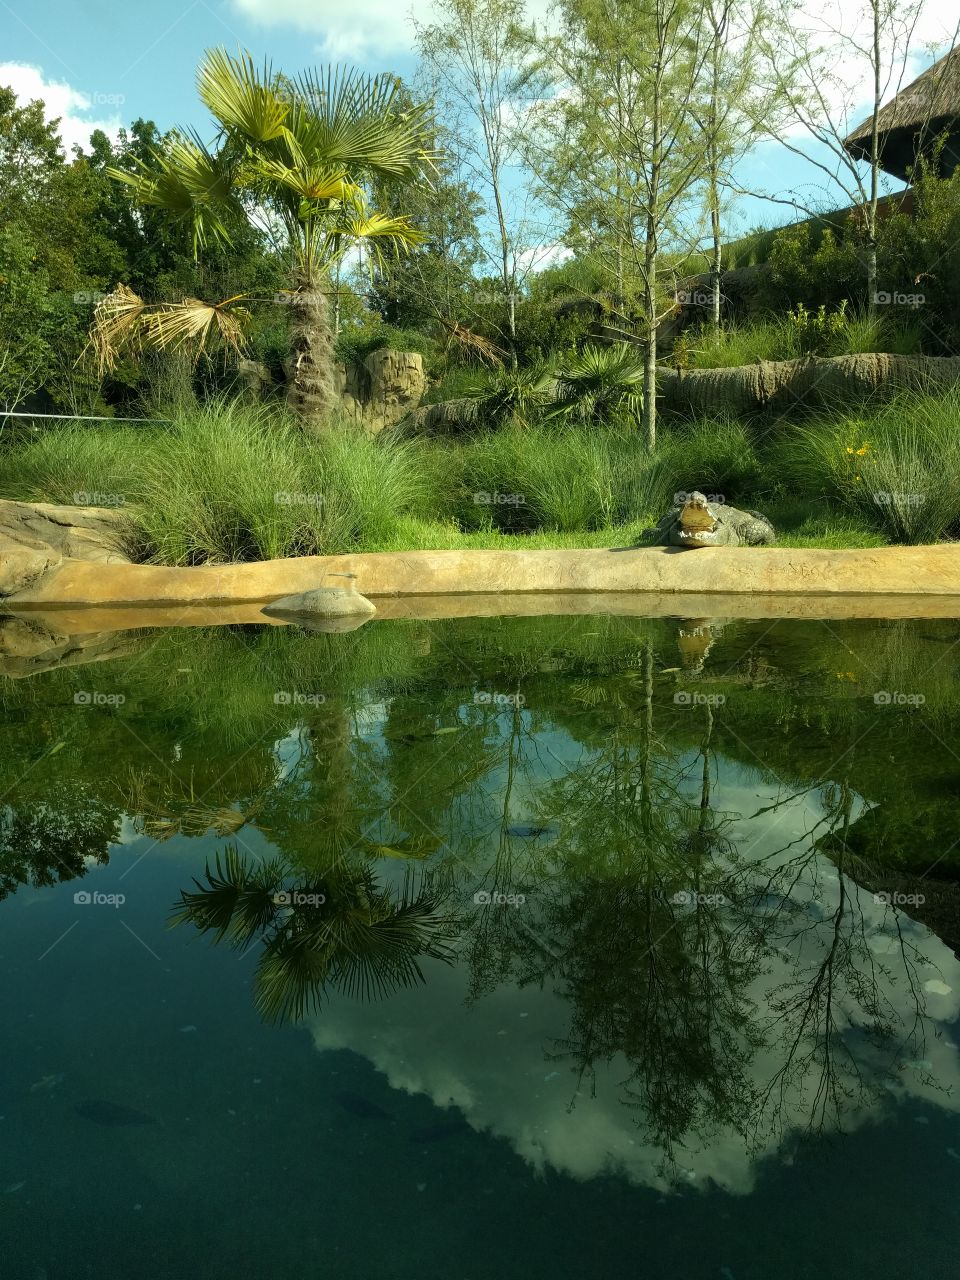 crocodile with mouth open and reflected in water